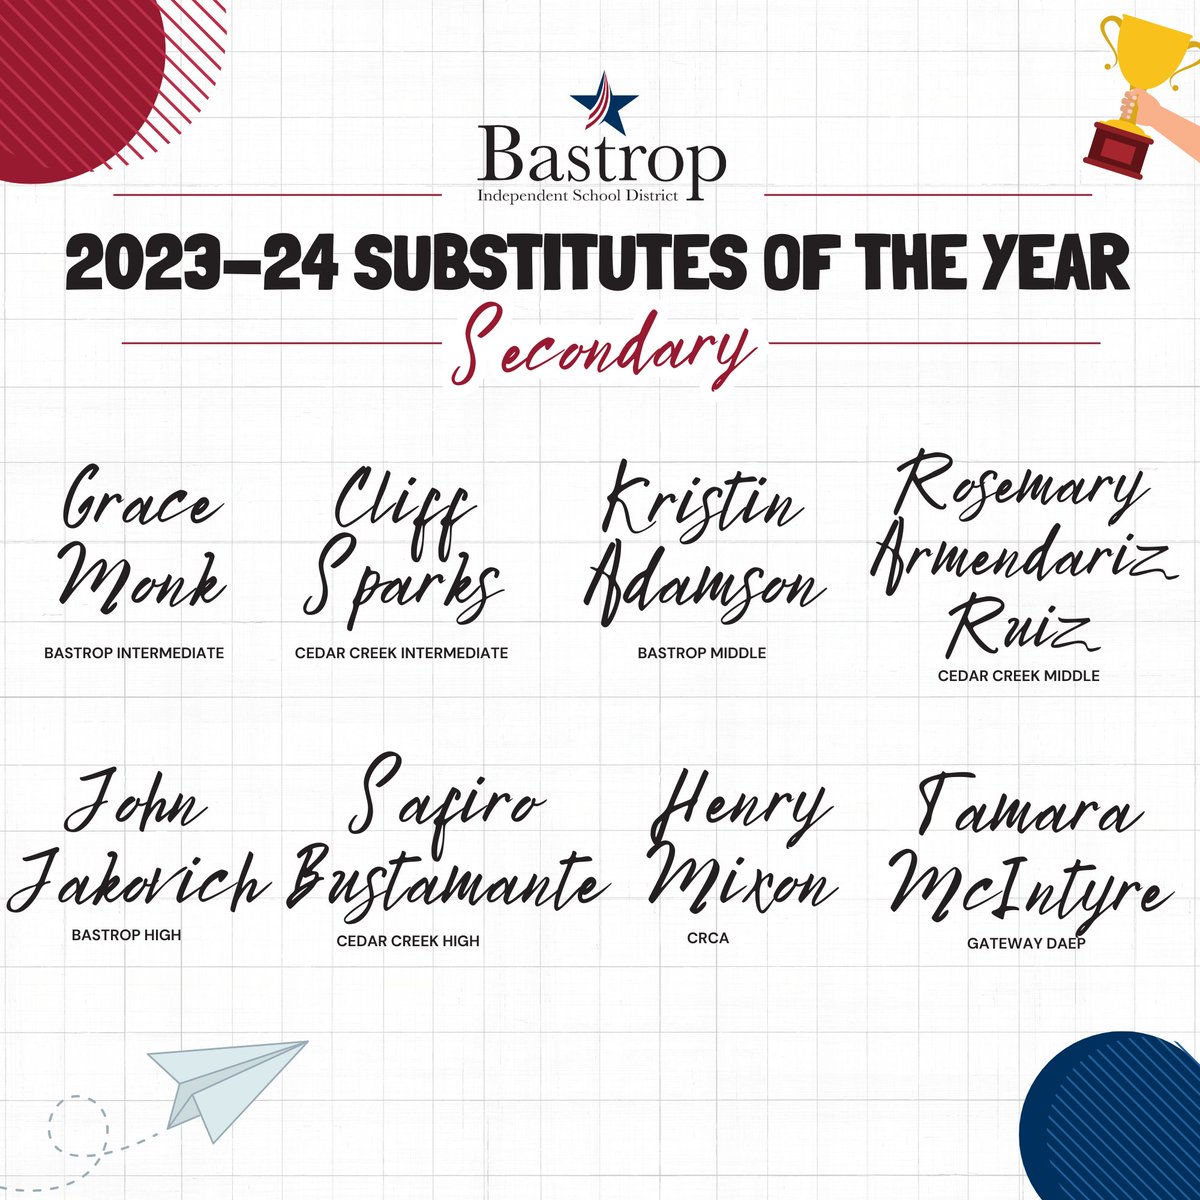 Please help us congratulate our Substitute of the Year candidates for each campus! 🌟 We are so grateful for each of these individuals' hard work and dedication. Without them, we could not run our district as efficiently as we do.